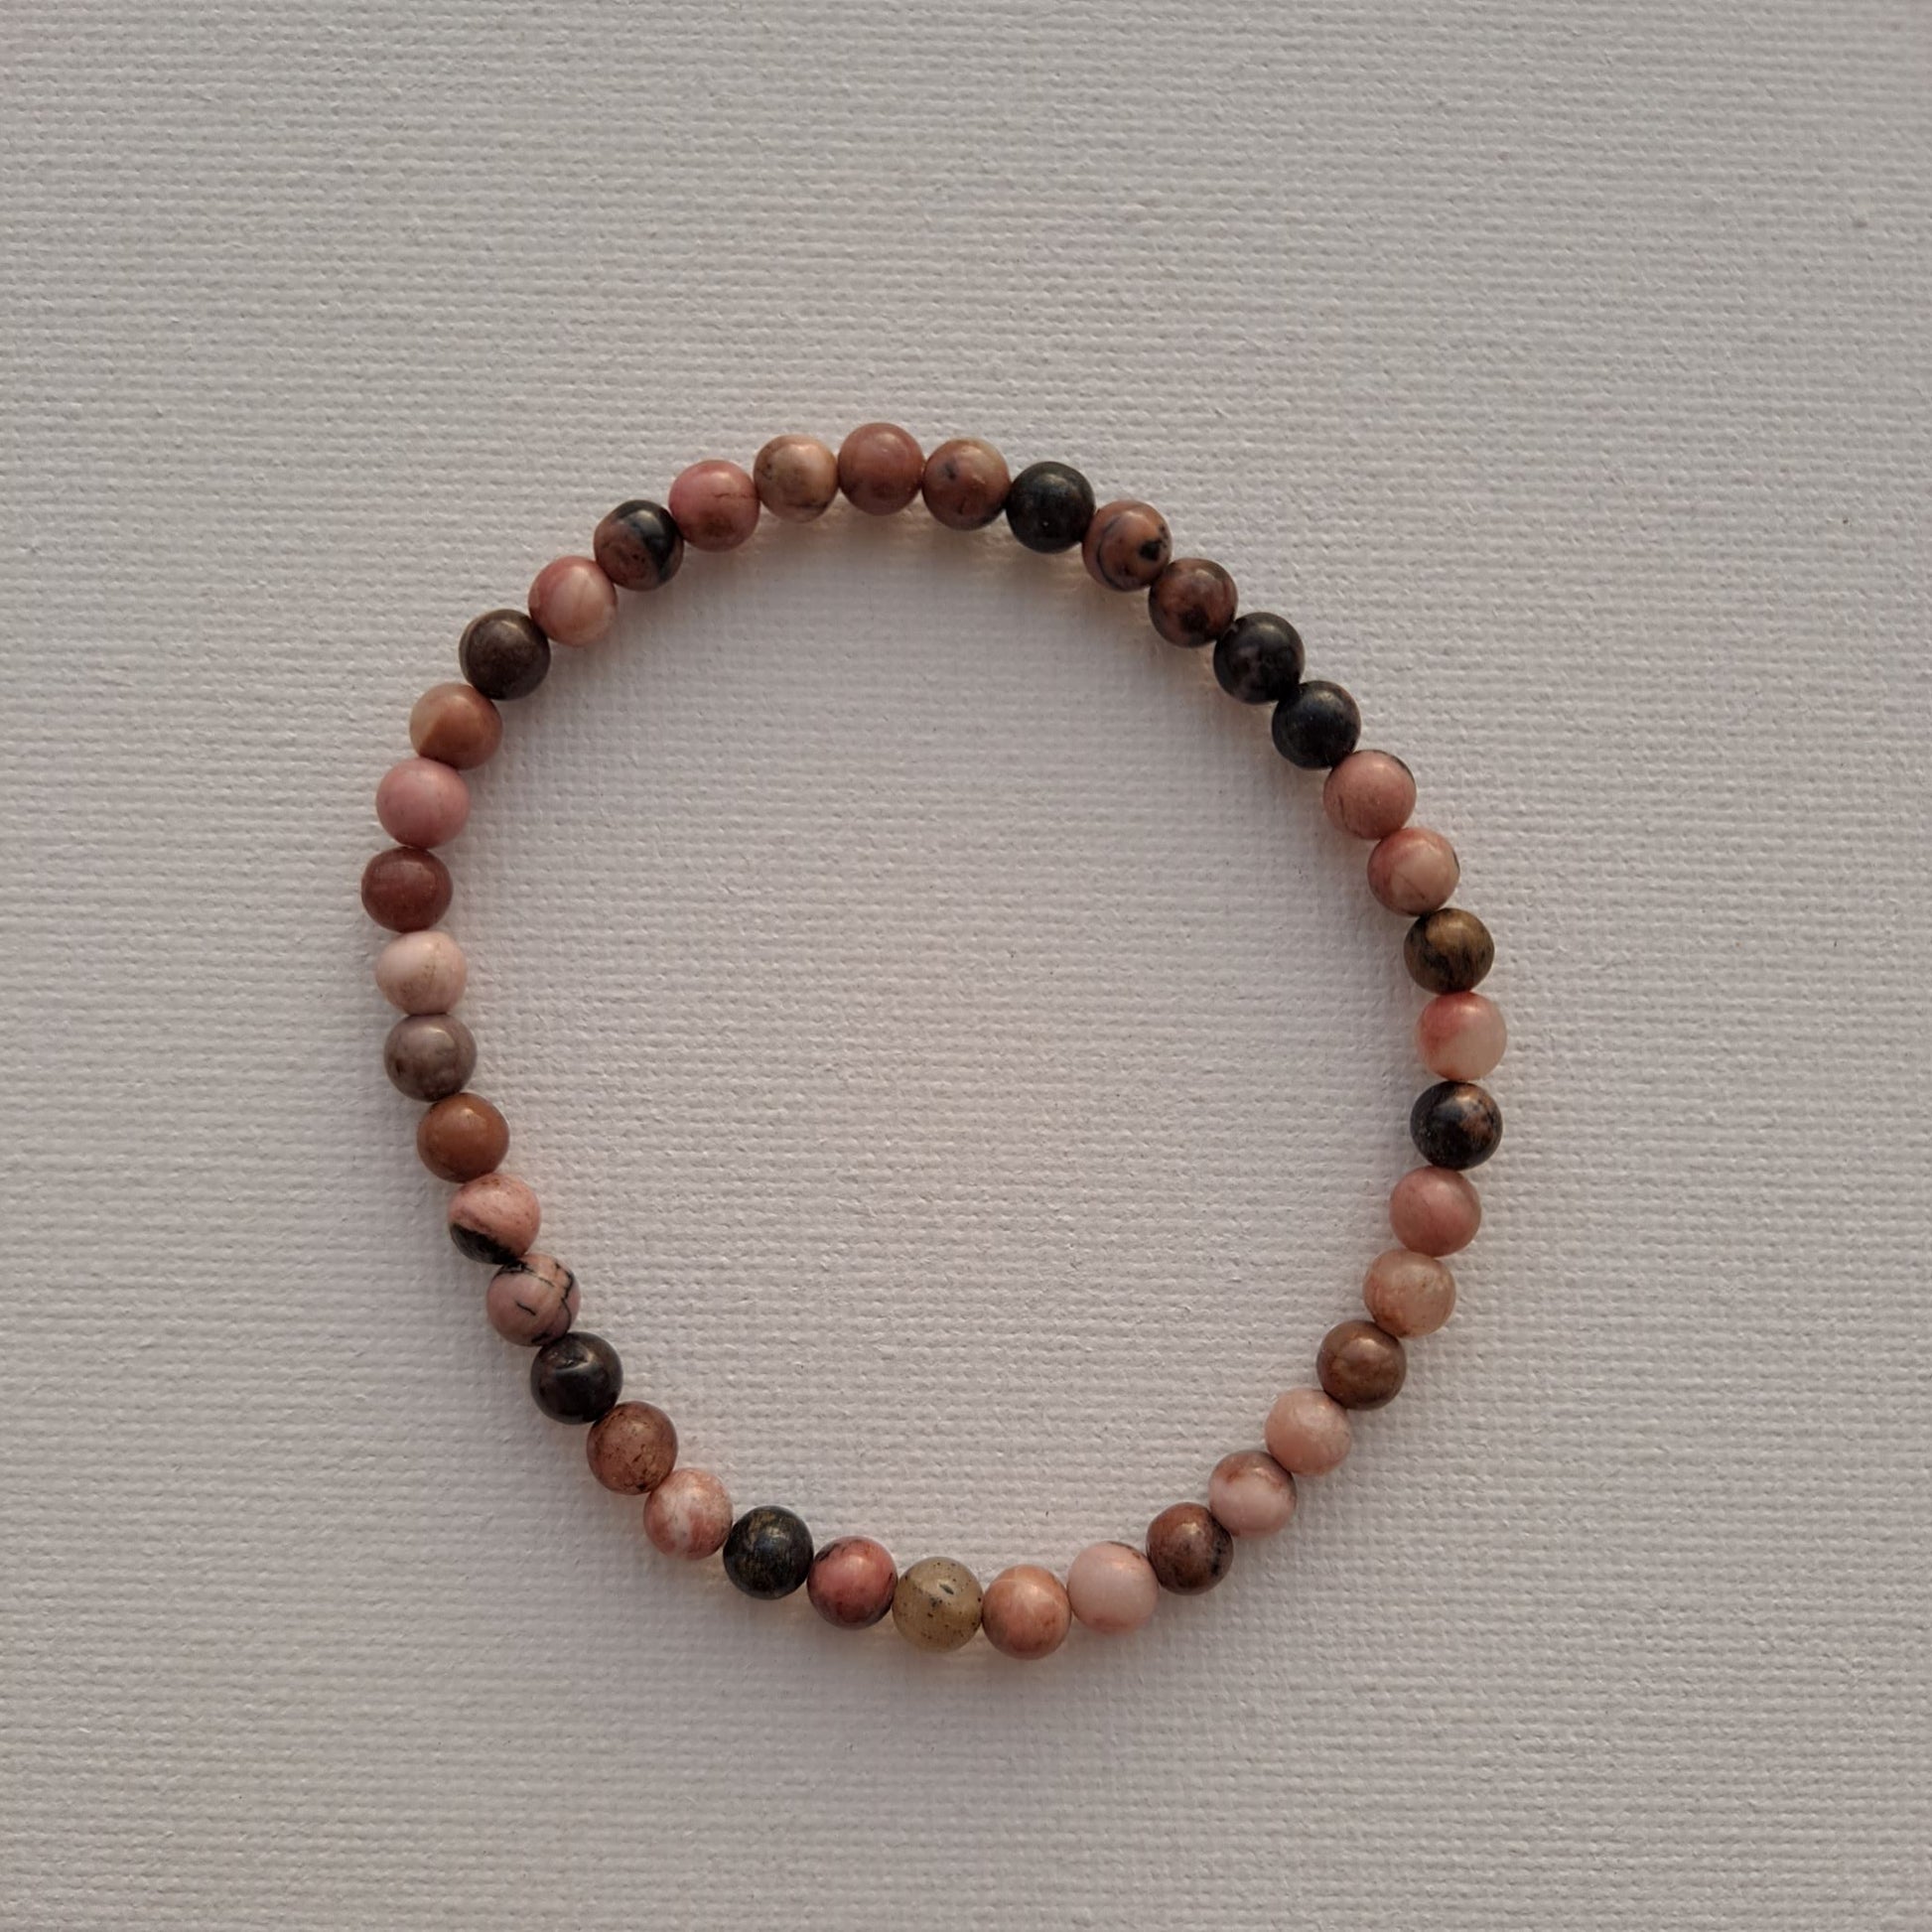 Dumi's Crystals | 4mm Rhodonite Stretch Bracelet (7 Inch) | Close-up of a handcrafted bracelet featuring genuine 4mm Rhodonite beads in soft pink hues with contrasting dark veins. Rhodonite is known as the stone of compassion and is believed to promote emotional healing and self-love.